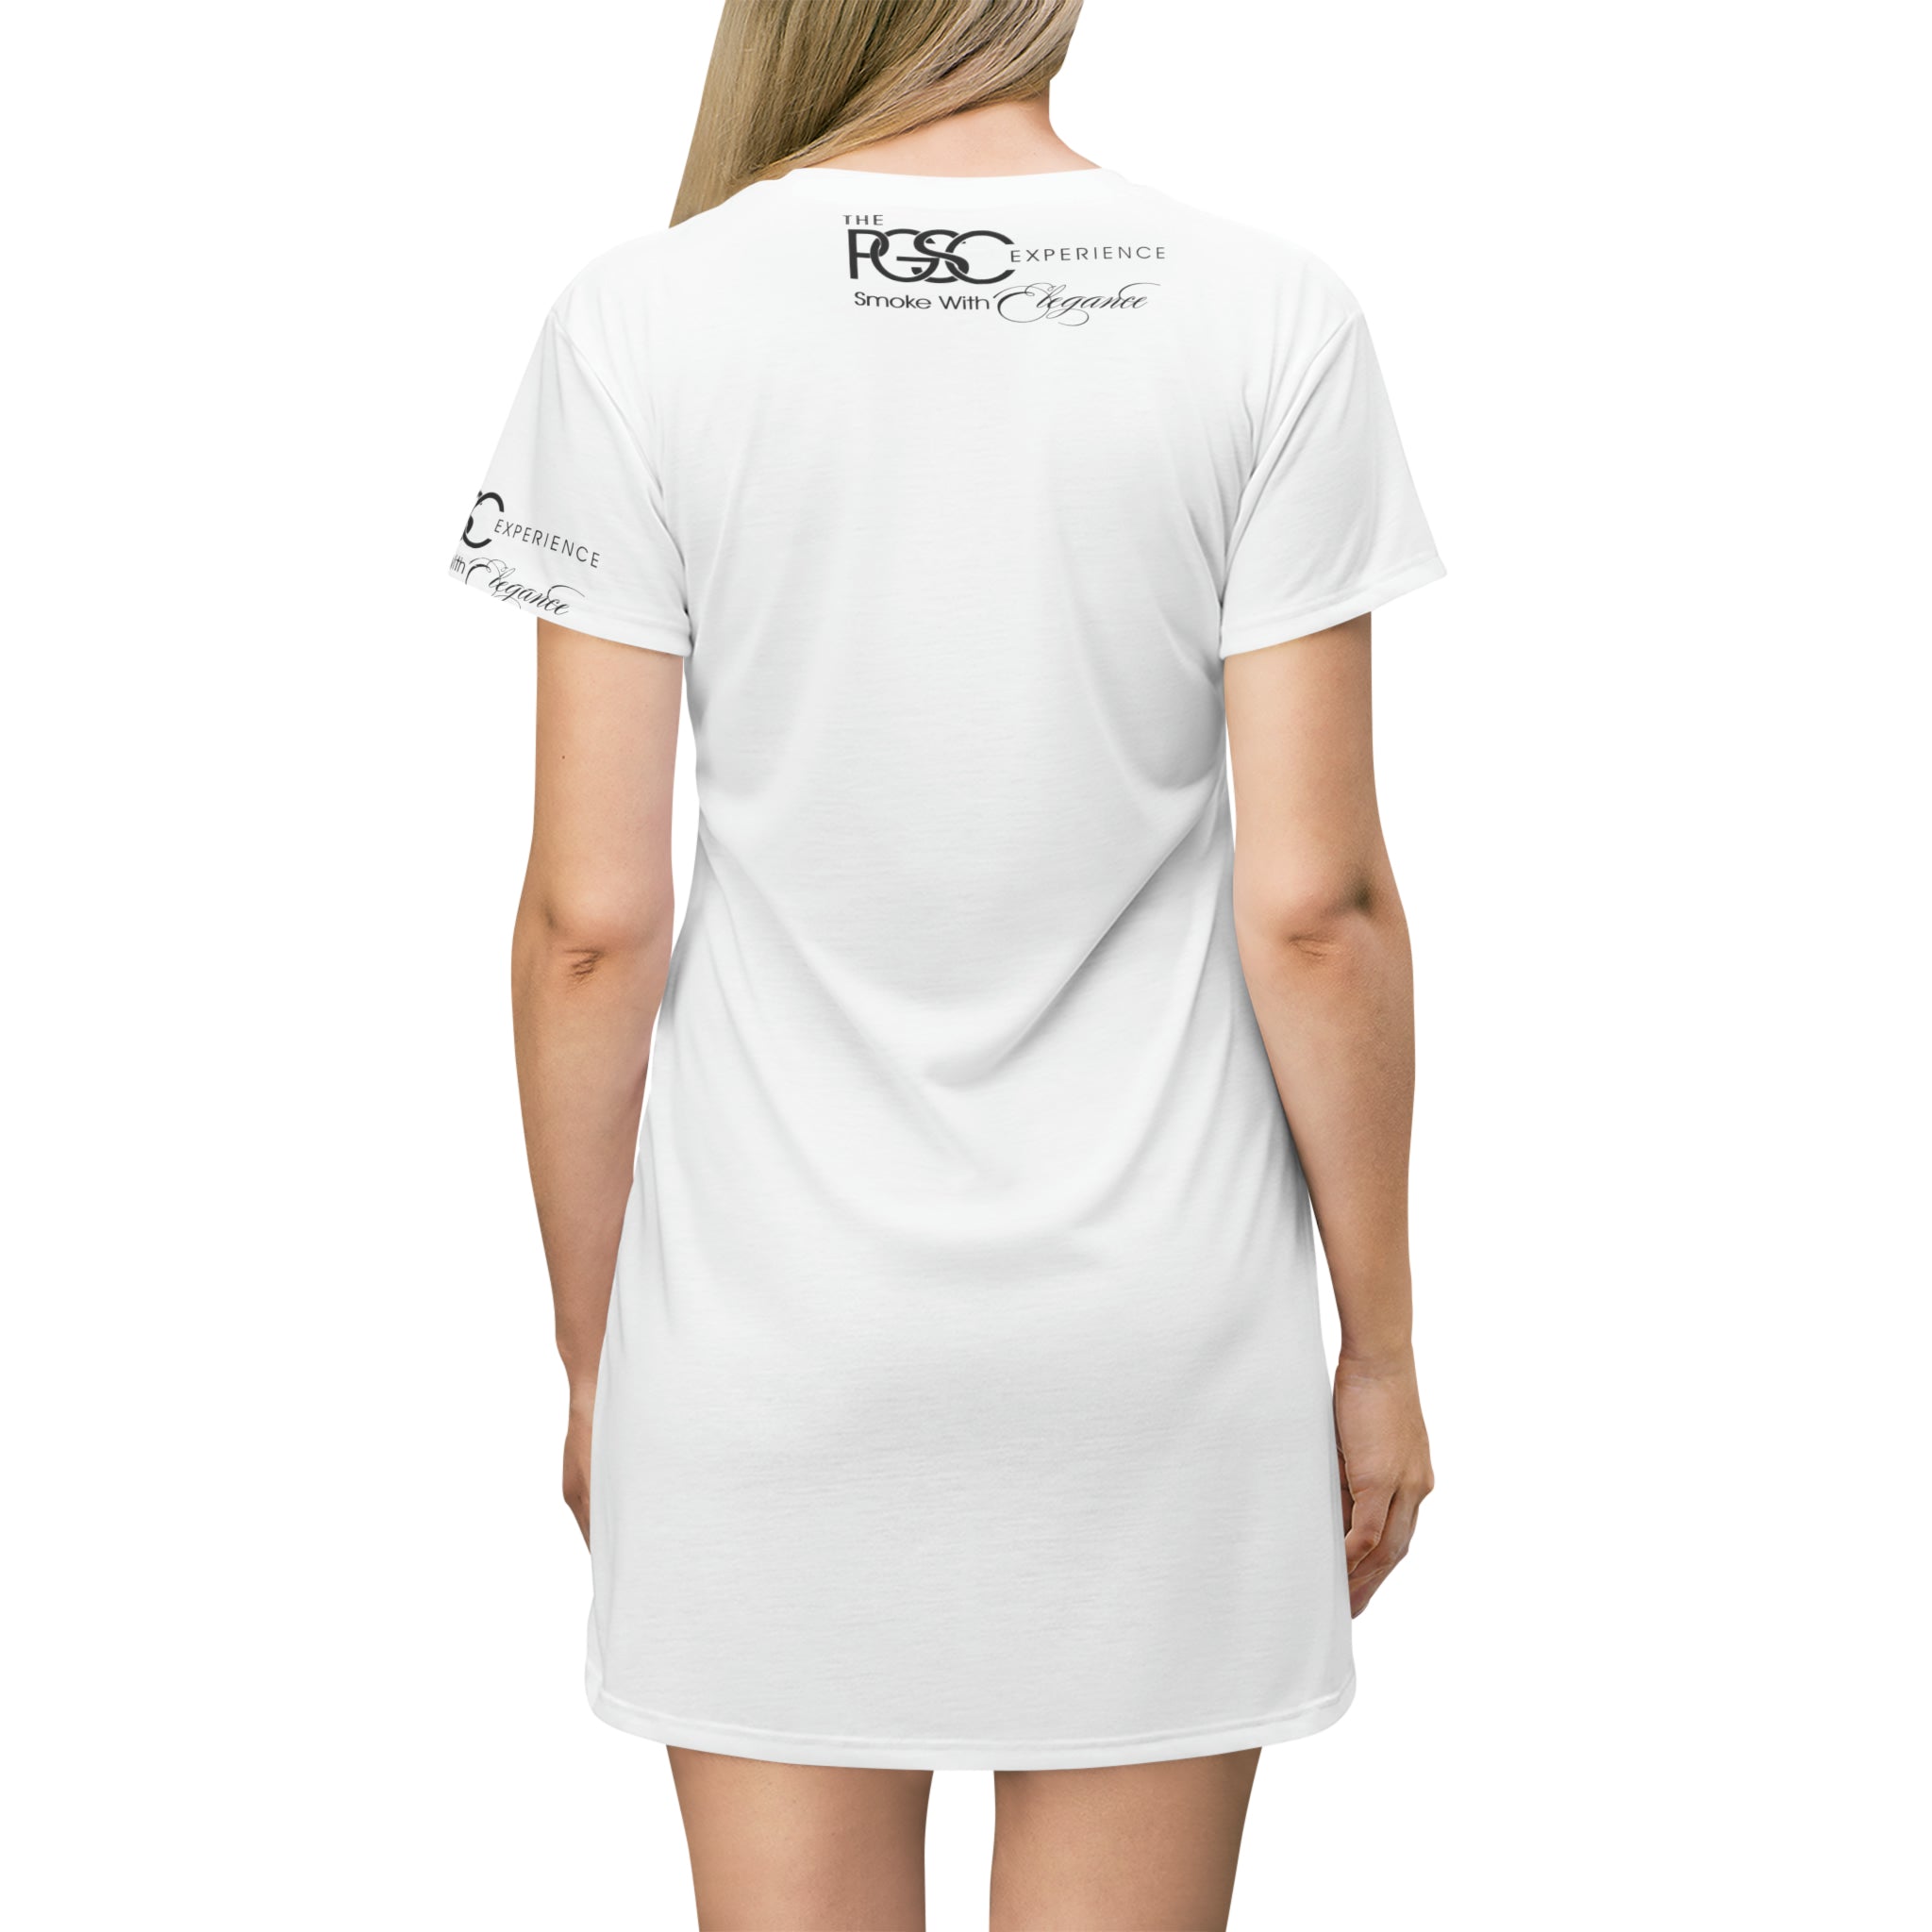 The PGSC Experience T-Shirt Dress